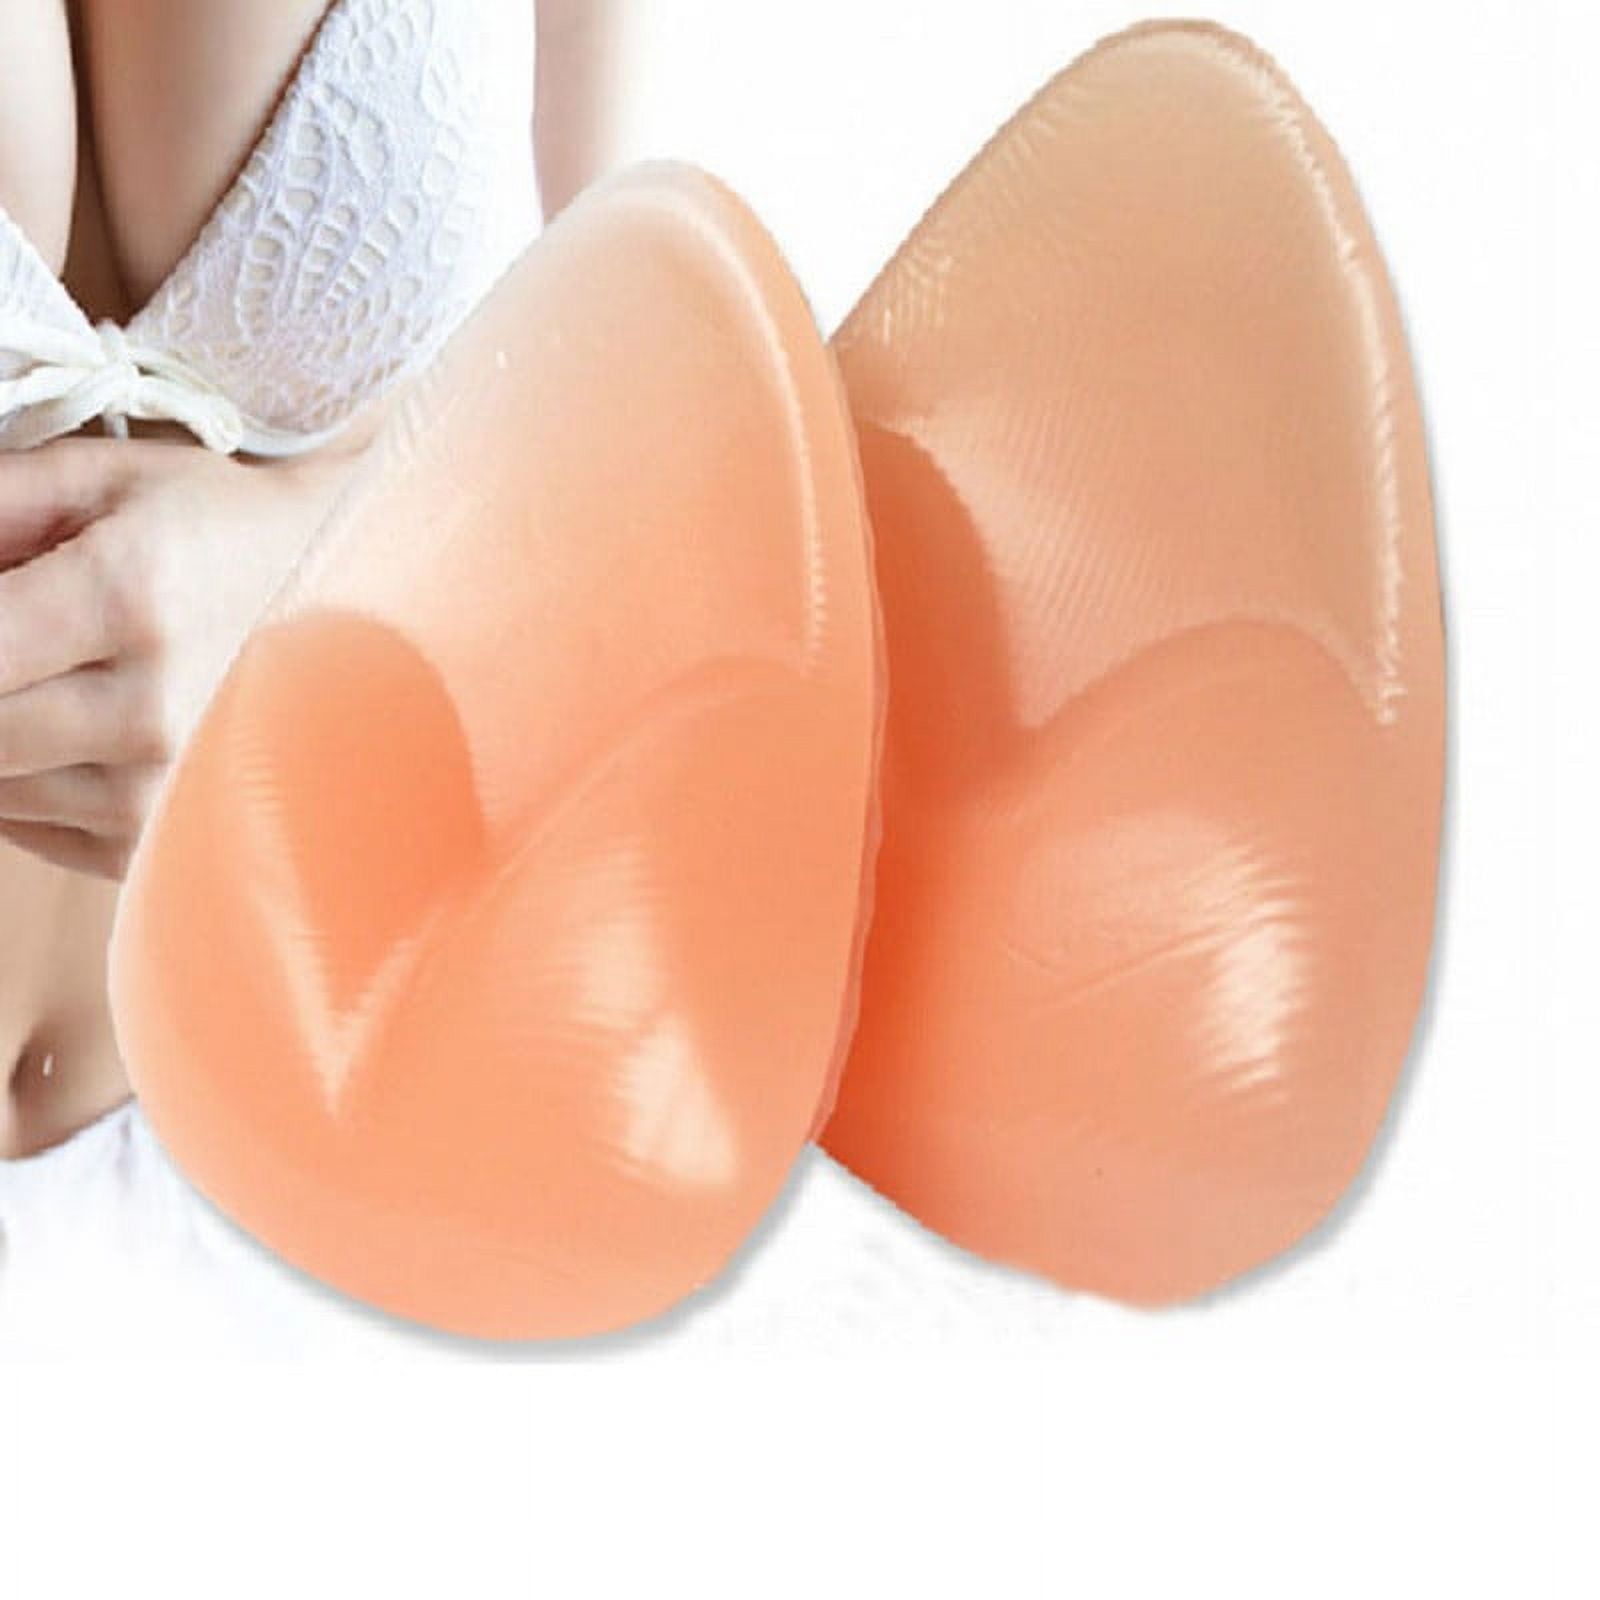 BIMEI See Through Bra CD Mastectomy Lingerie Bra Silicone Breast Forms  Prosthesis Pocket Bra with Steel Ring 9008,Beige,38D